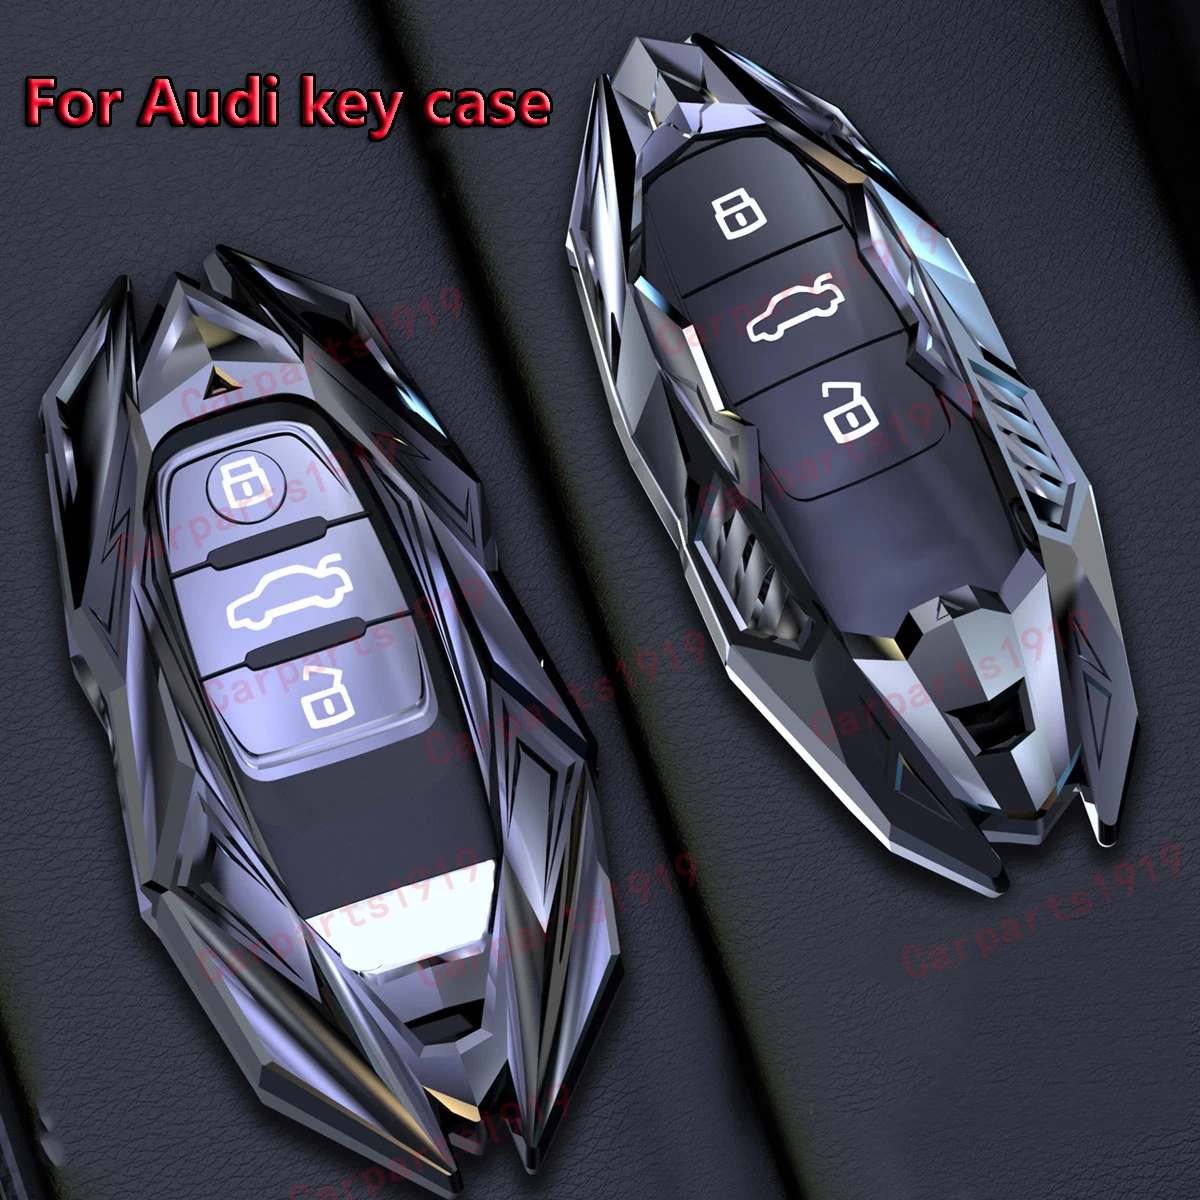 

Car Key Case Cover shell fob For Audi A1 A3 Q2L Q3 S3 S5 S6 R8 TT TTS 2020 Q7 Q5 A6 A4 A4L Q5L A5 A6L A7 A8 Q8 S4 S8 accessories